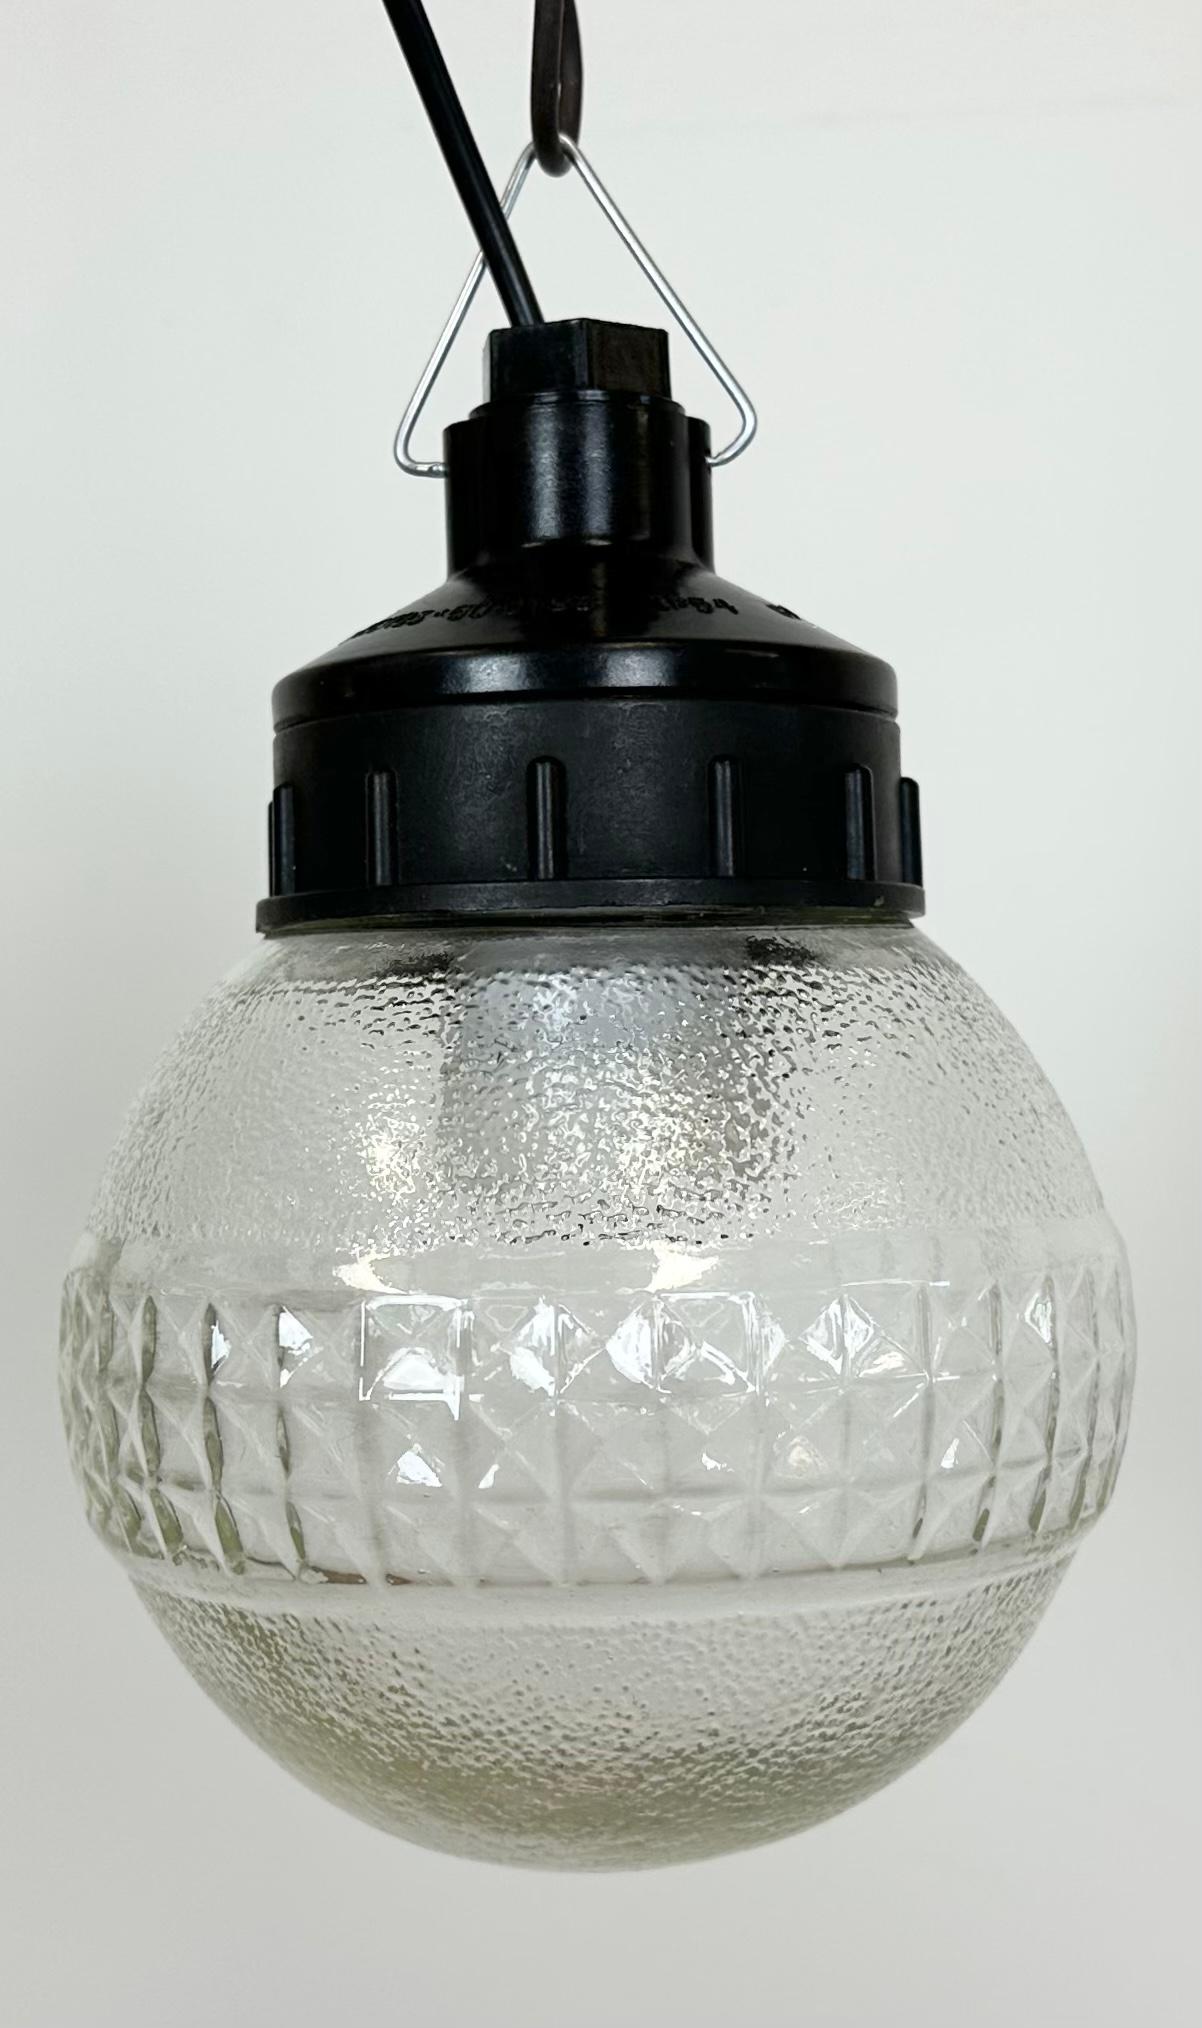 Russian Industrial Bakelite Pendant Light with Frosted Glass, 1970s For Sale